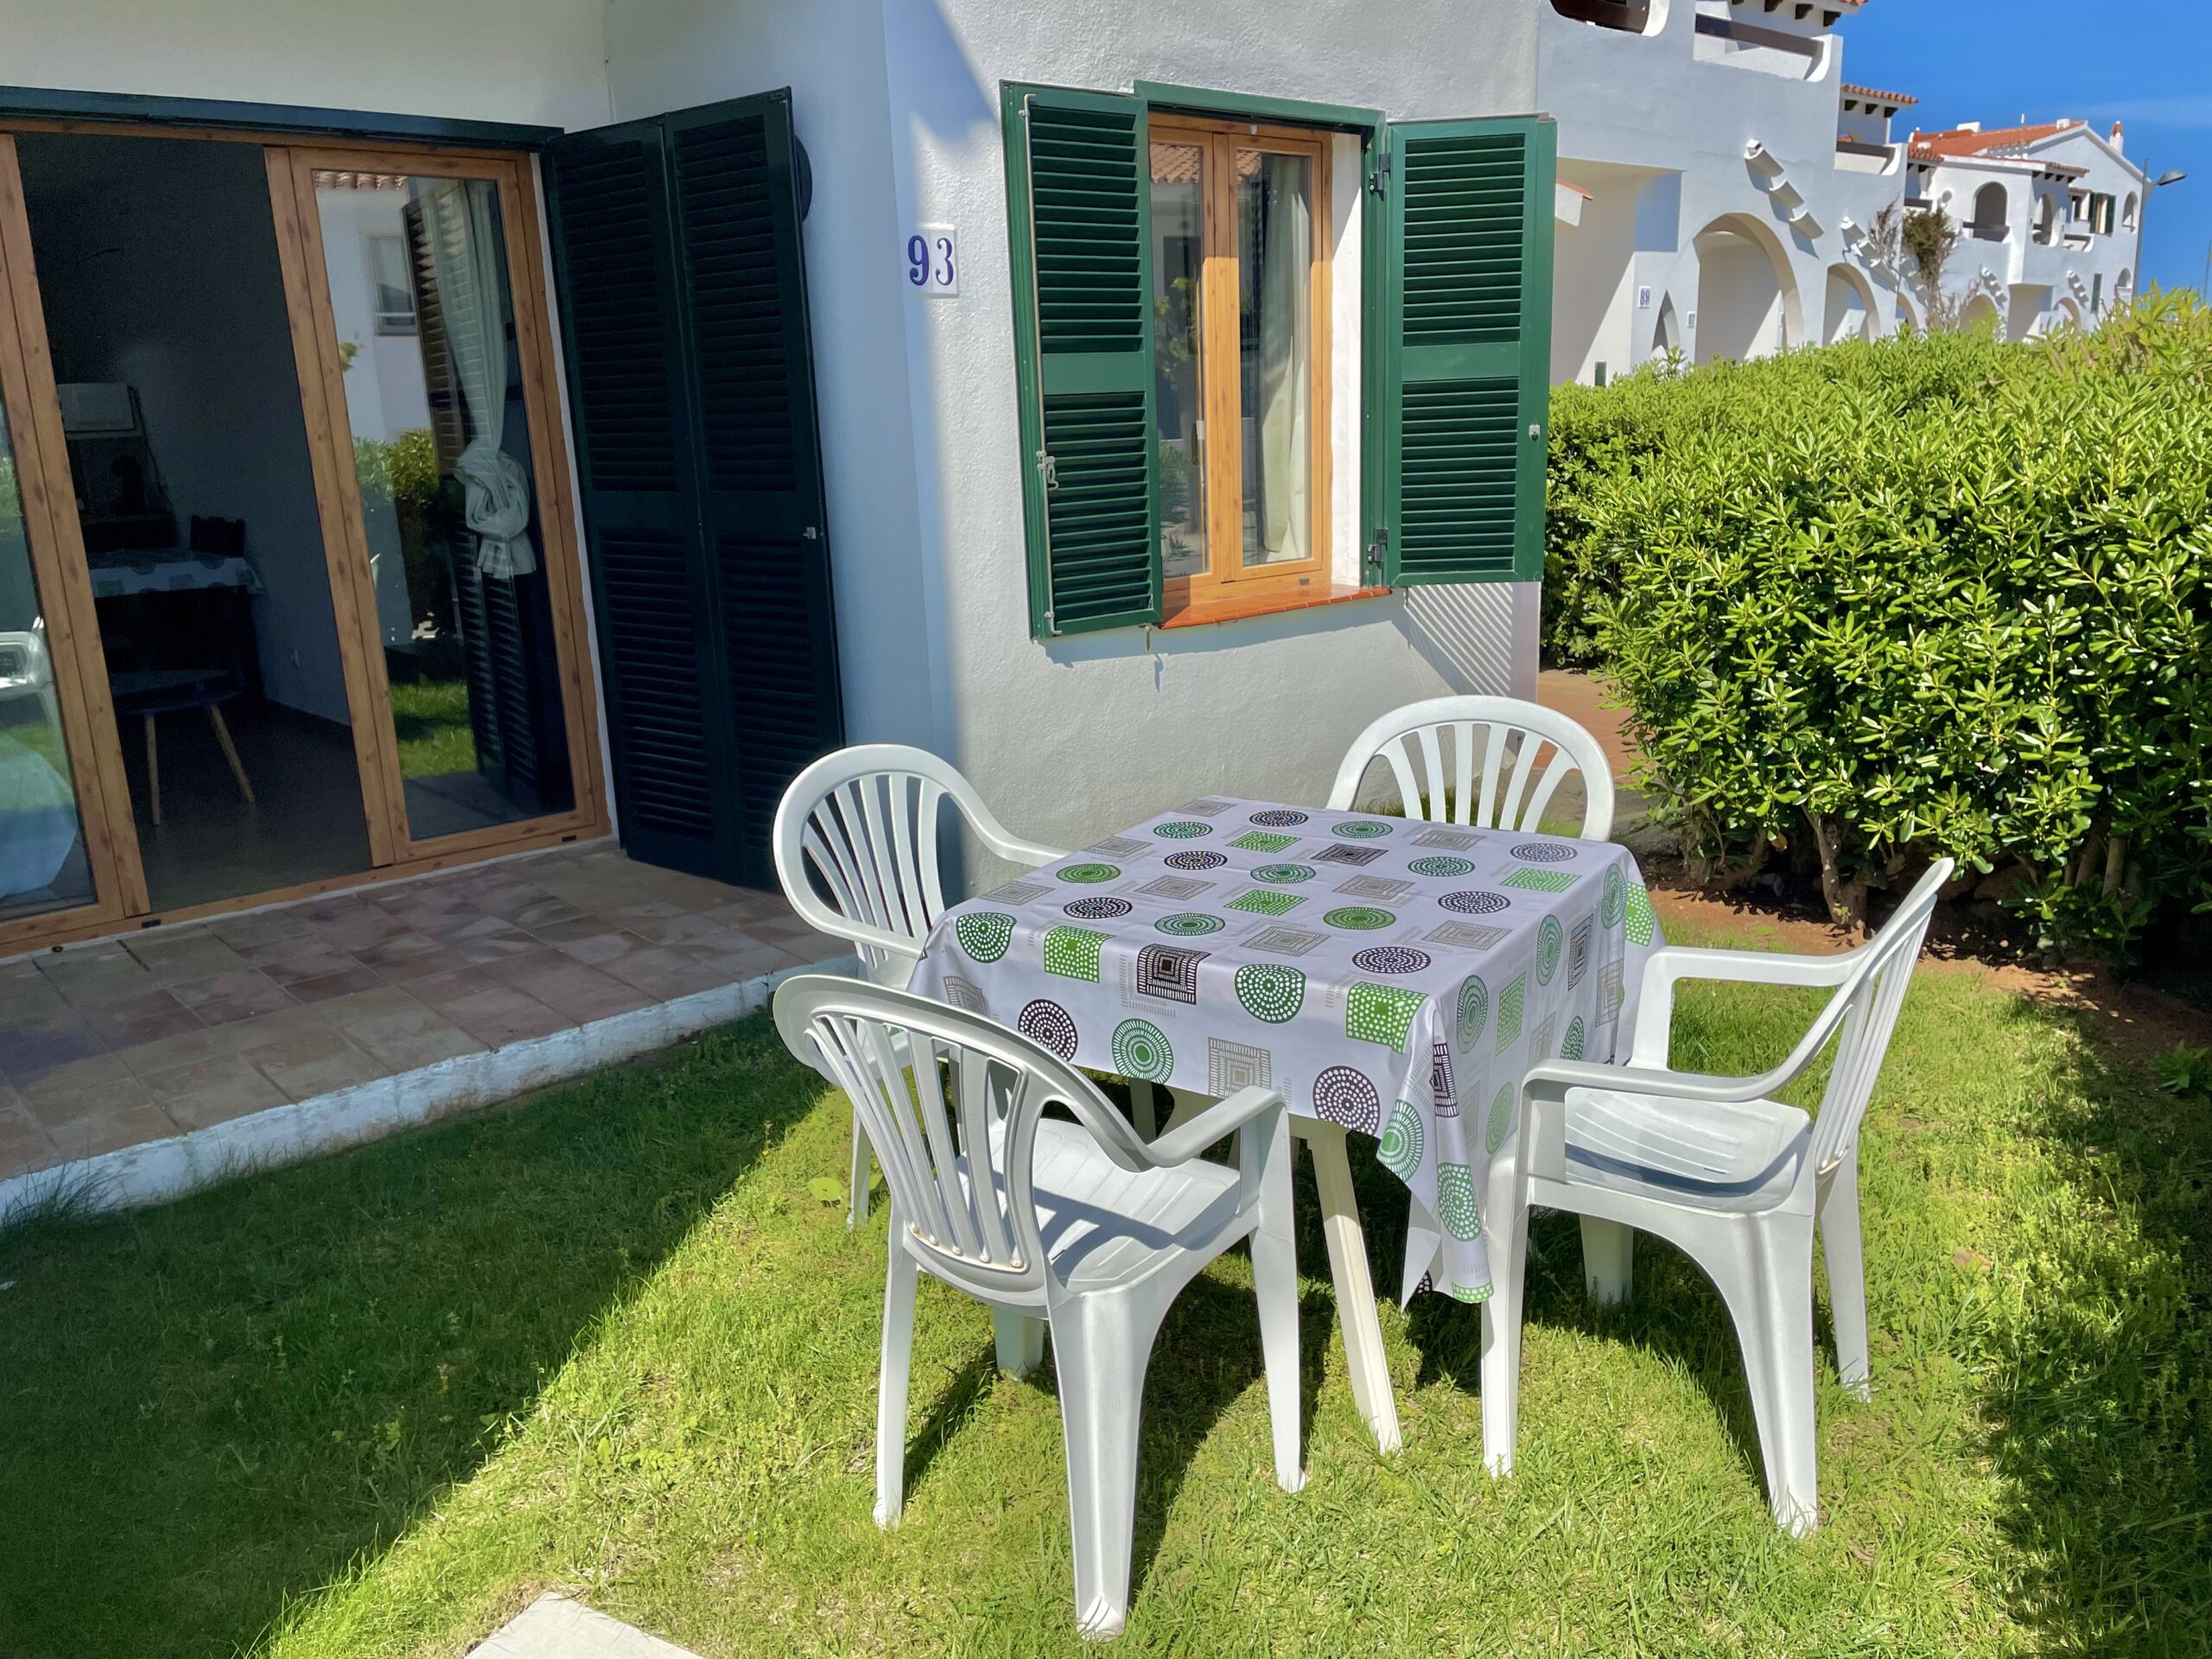 MESTRAL – Ground floor apartment with pool next to the beach in urb. Arenal coast, Arenal d’en Castell.